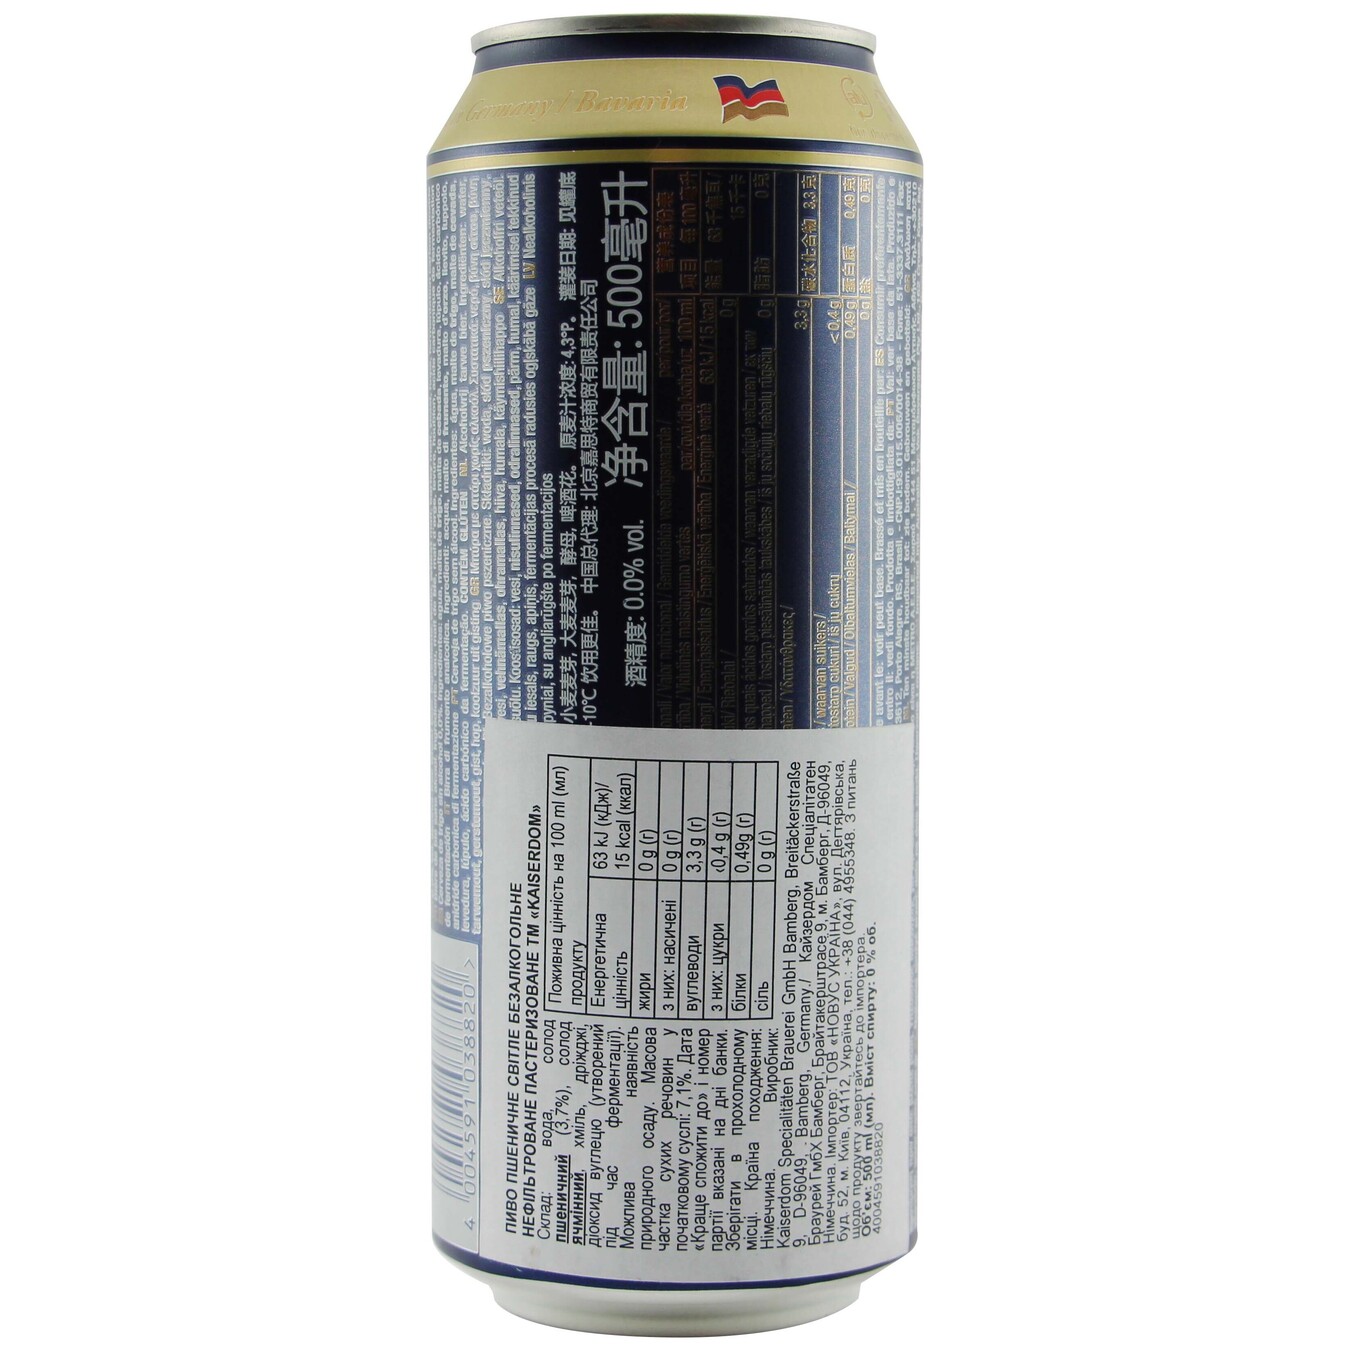 Kaiserdom Hefe Non-Alcoholic Beer Can 0,5l 2